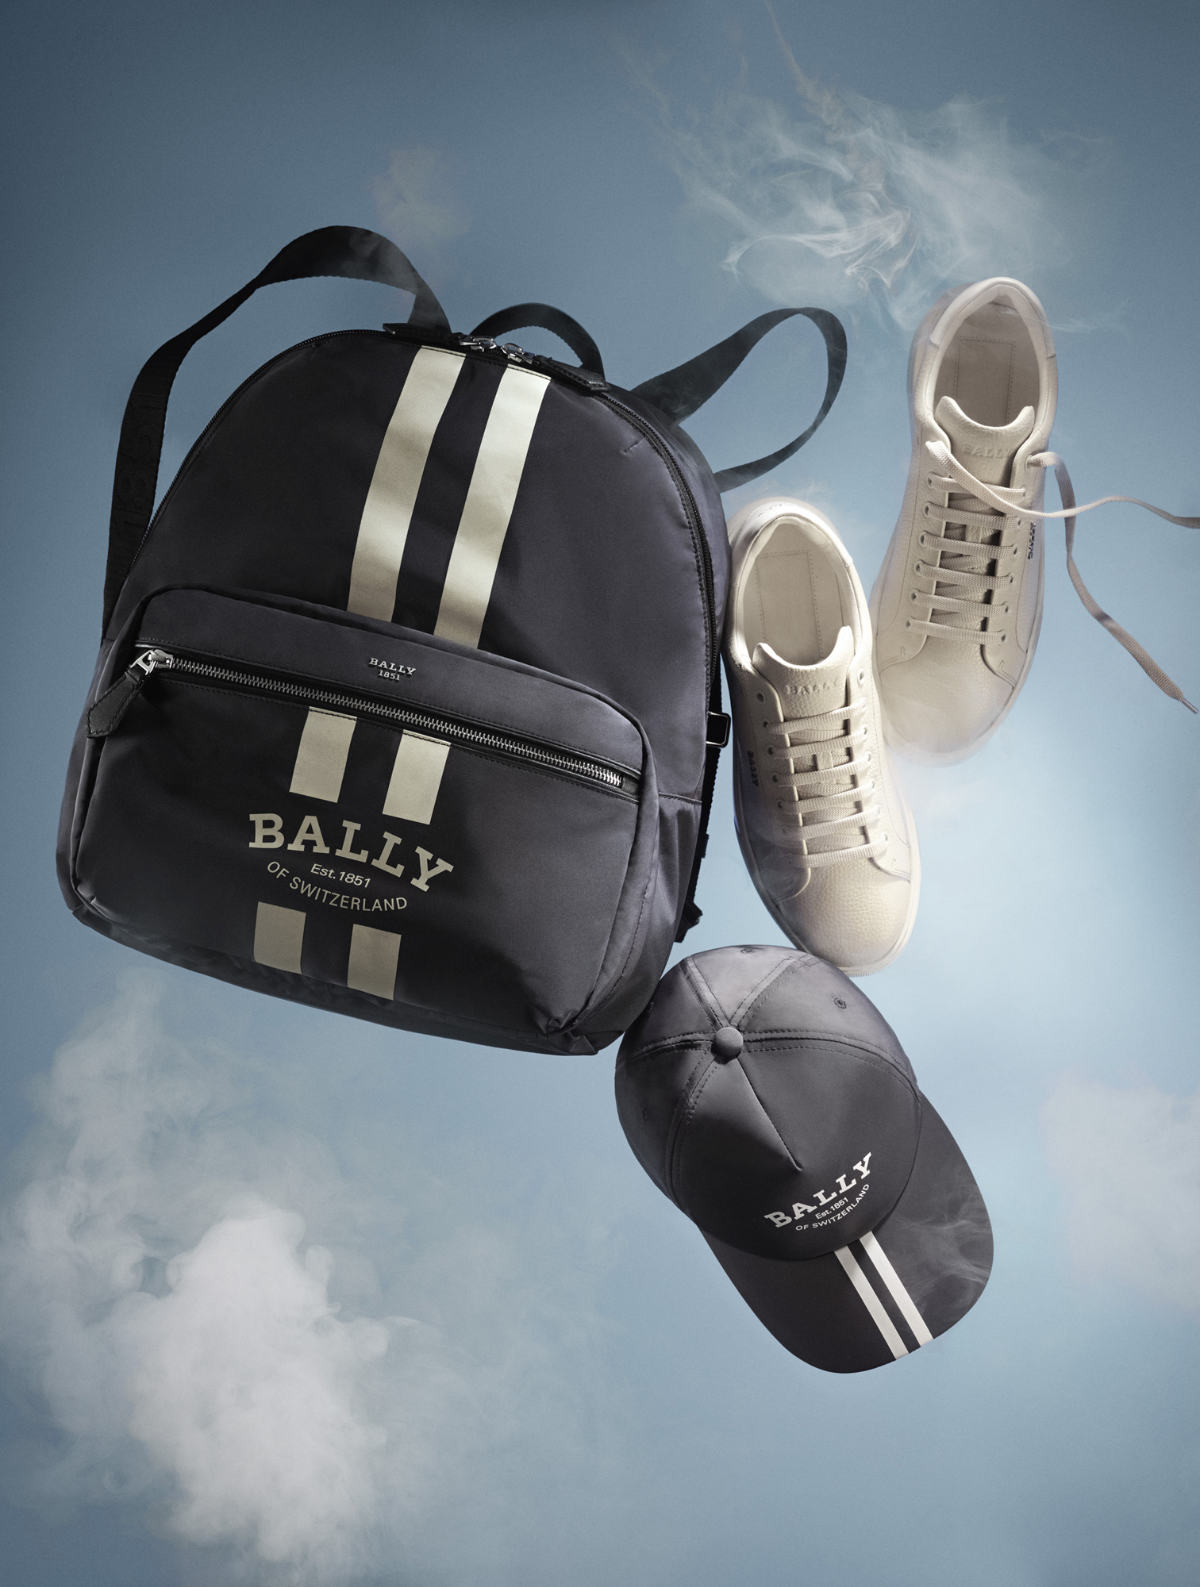 Bally: Holiday Gift Guide 2021